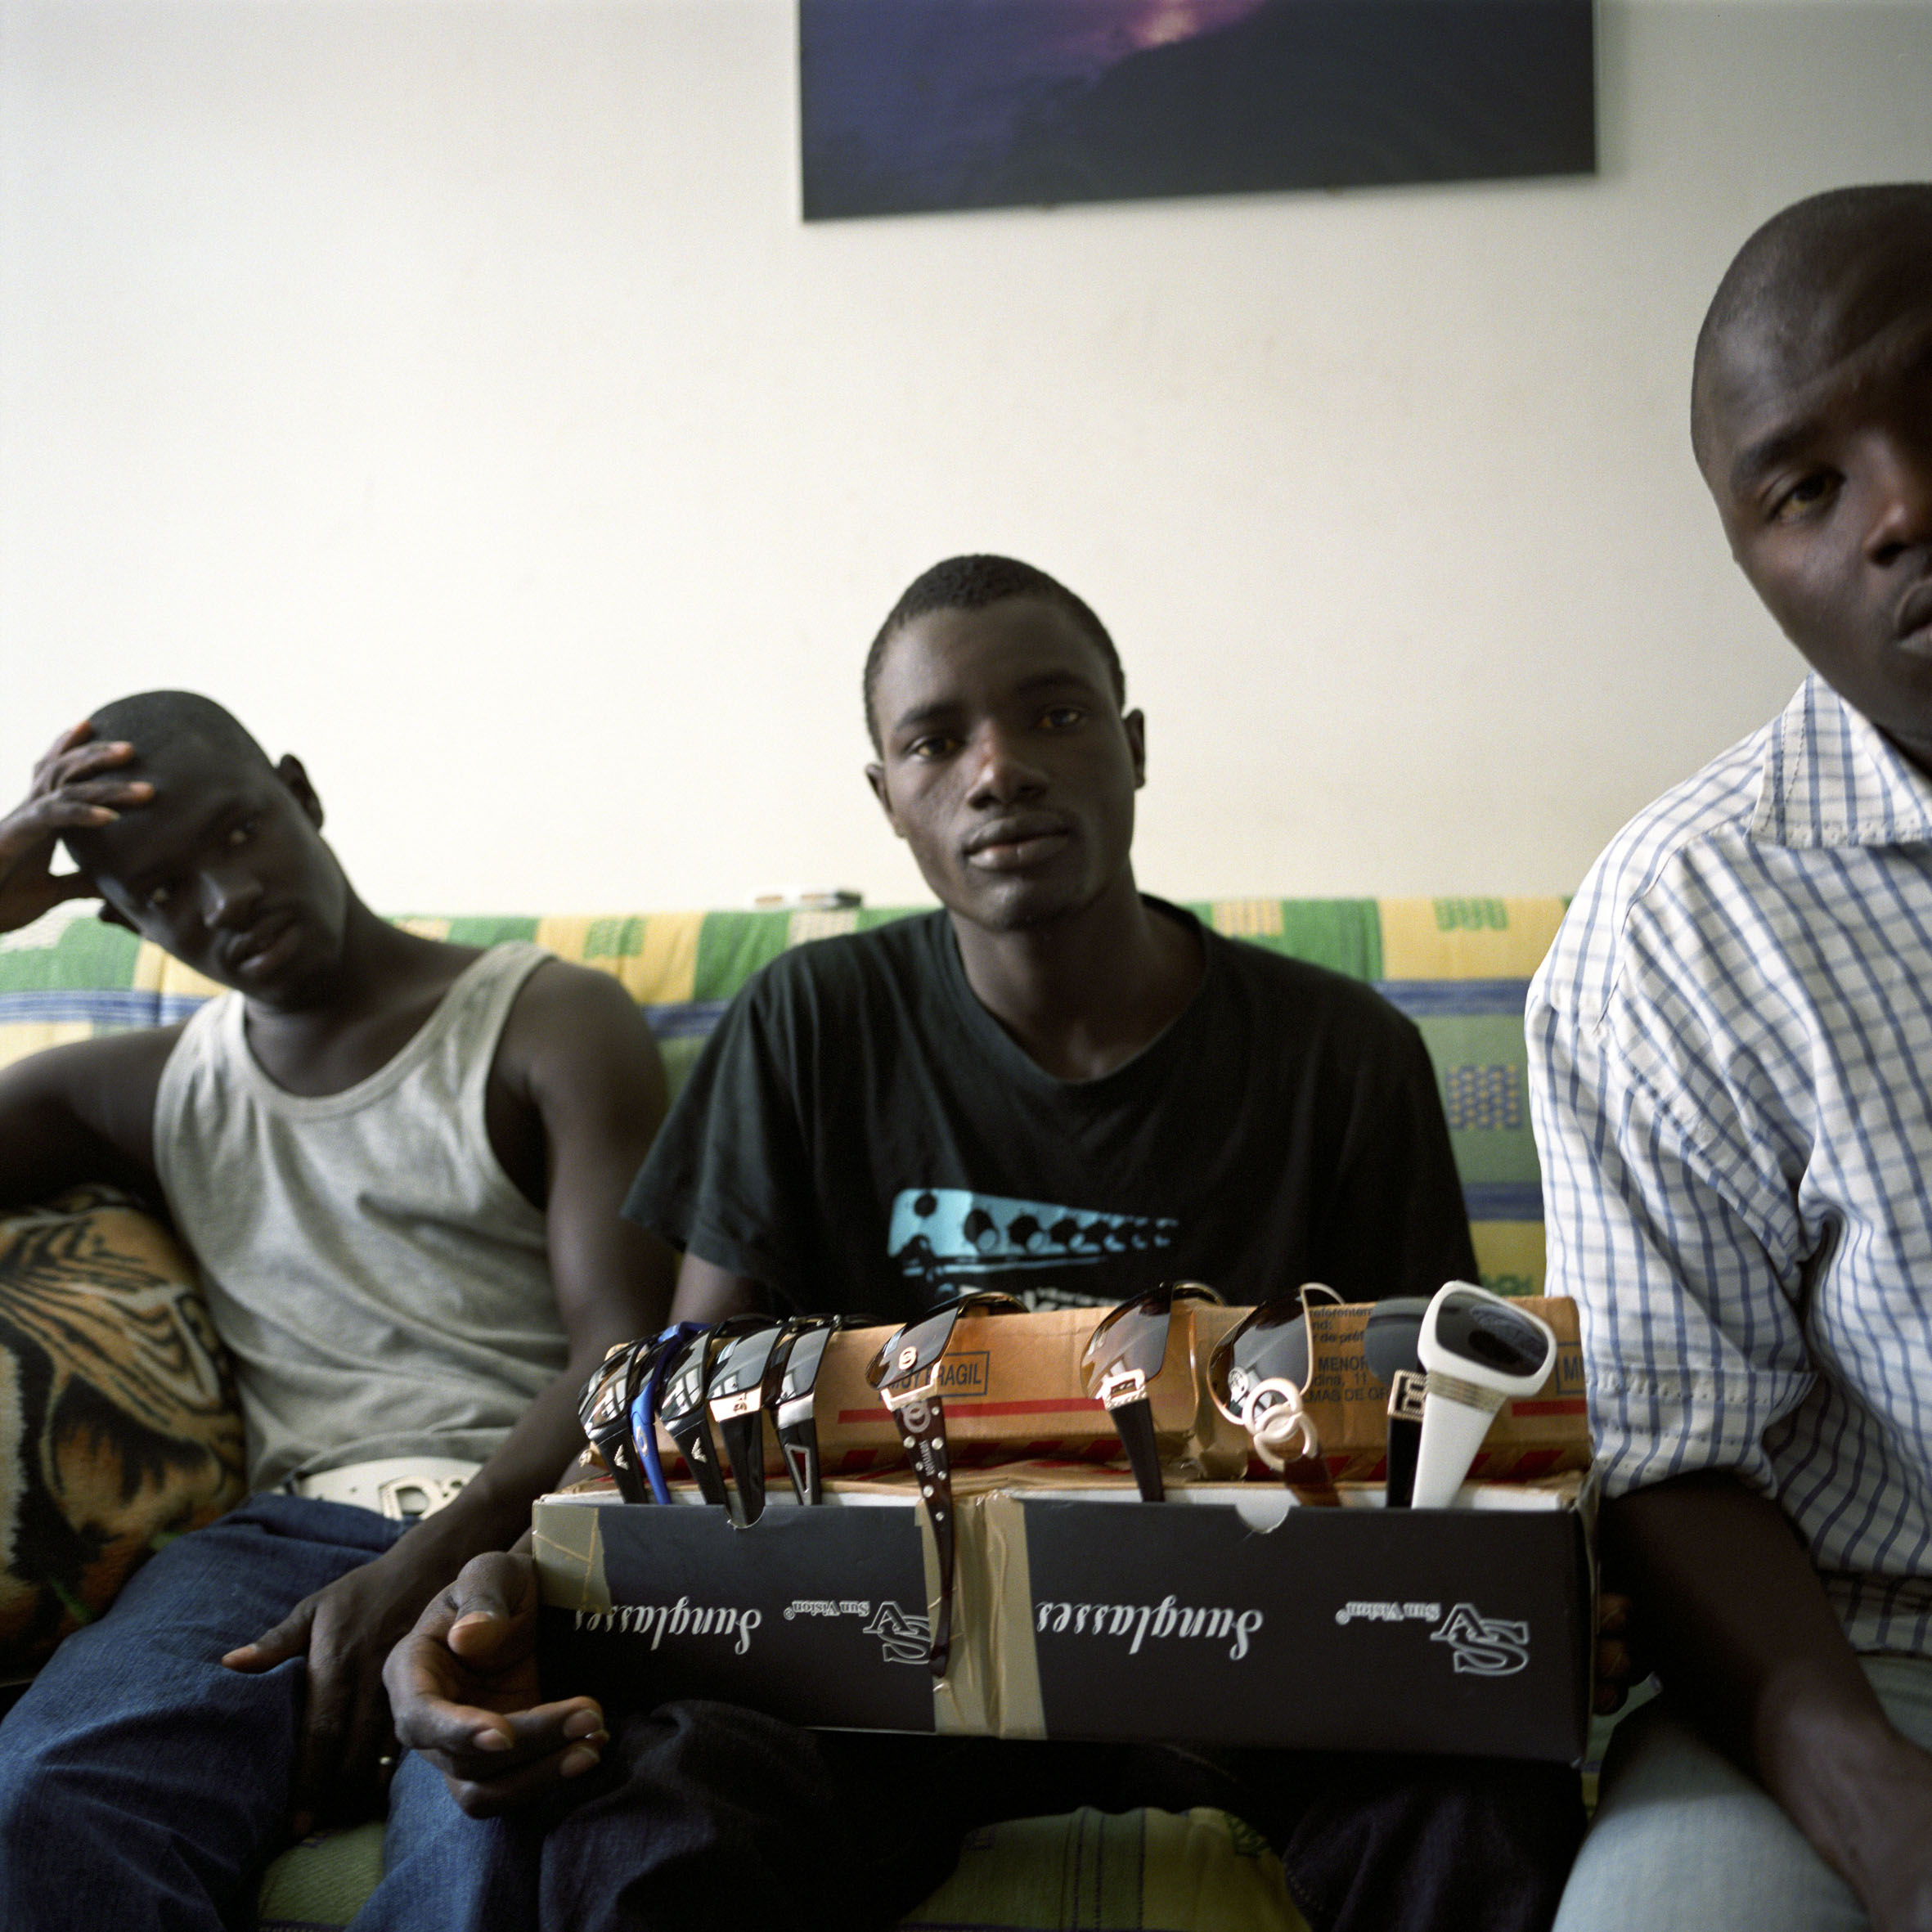 Undocumented immigrants from Senegal sell sunglasses in flea markets around Las Palmas. They arrived in Spain with a boat two years ago, and they all share a small apartment. Once in Europe, undocumented migrants are more at risk of being exploited, working long hours, living in substandard accommodation, and being in poor health.